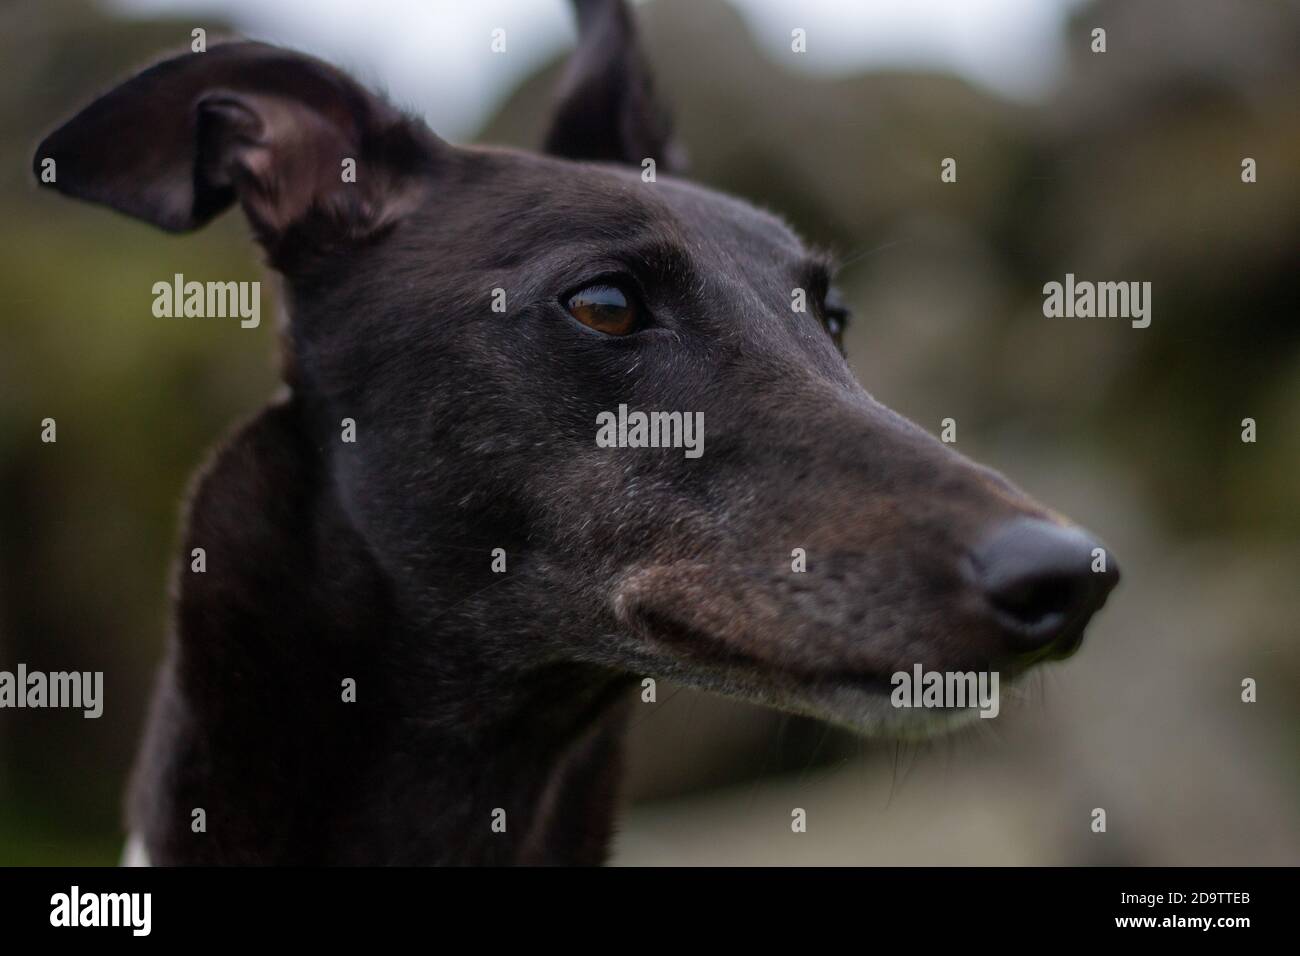 Black greyhound looking away smiling with ears pricked up outside Stock Photo